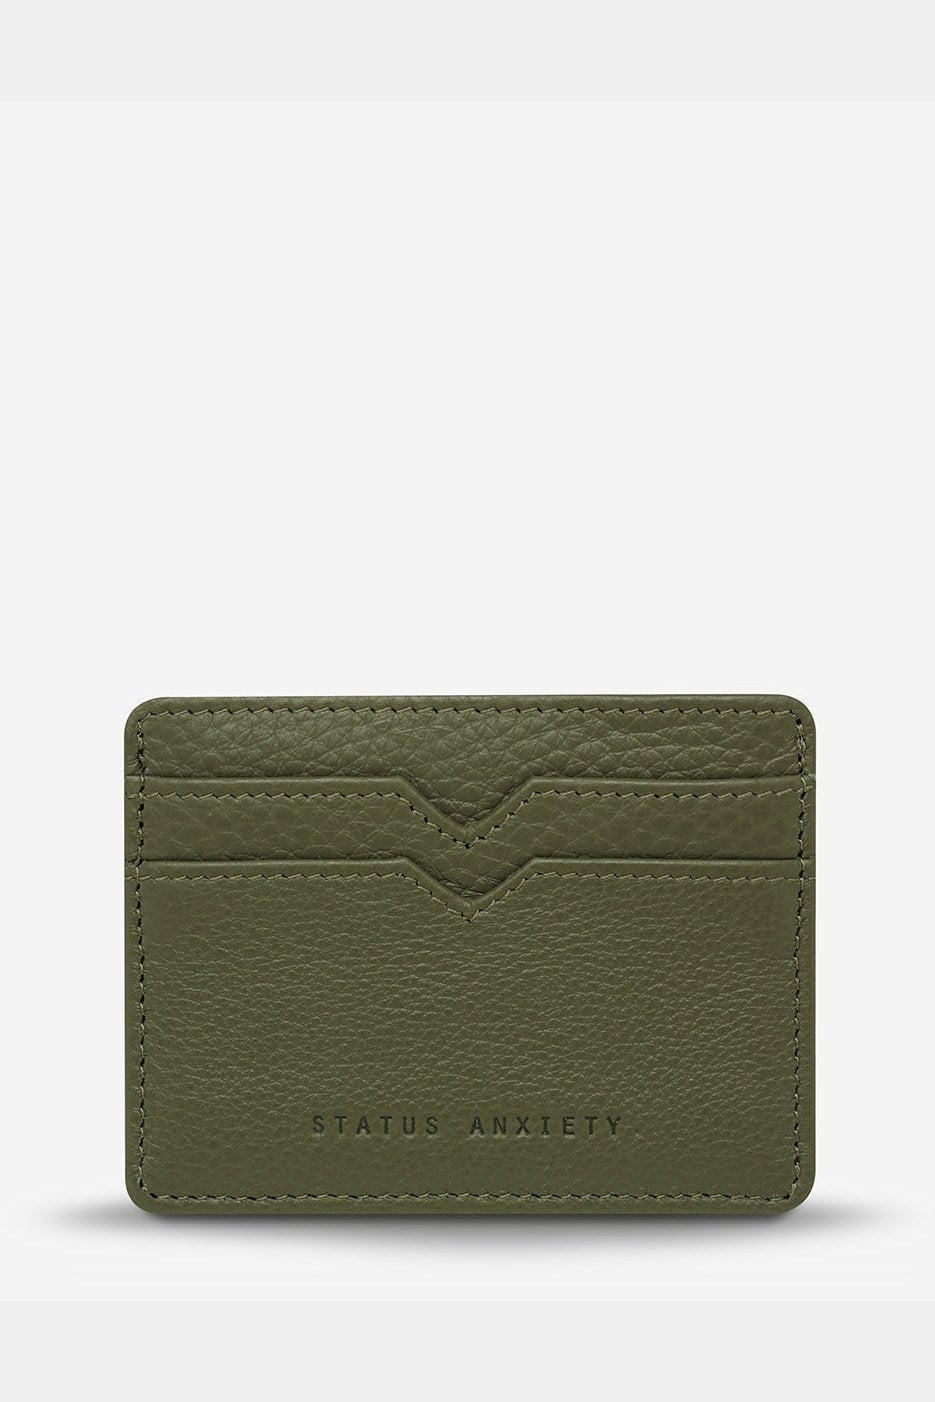 Status anxiety together for now wallet - khaki